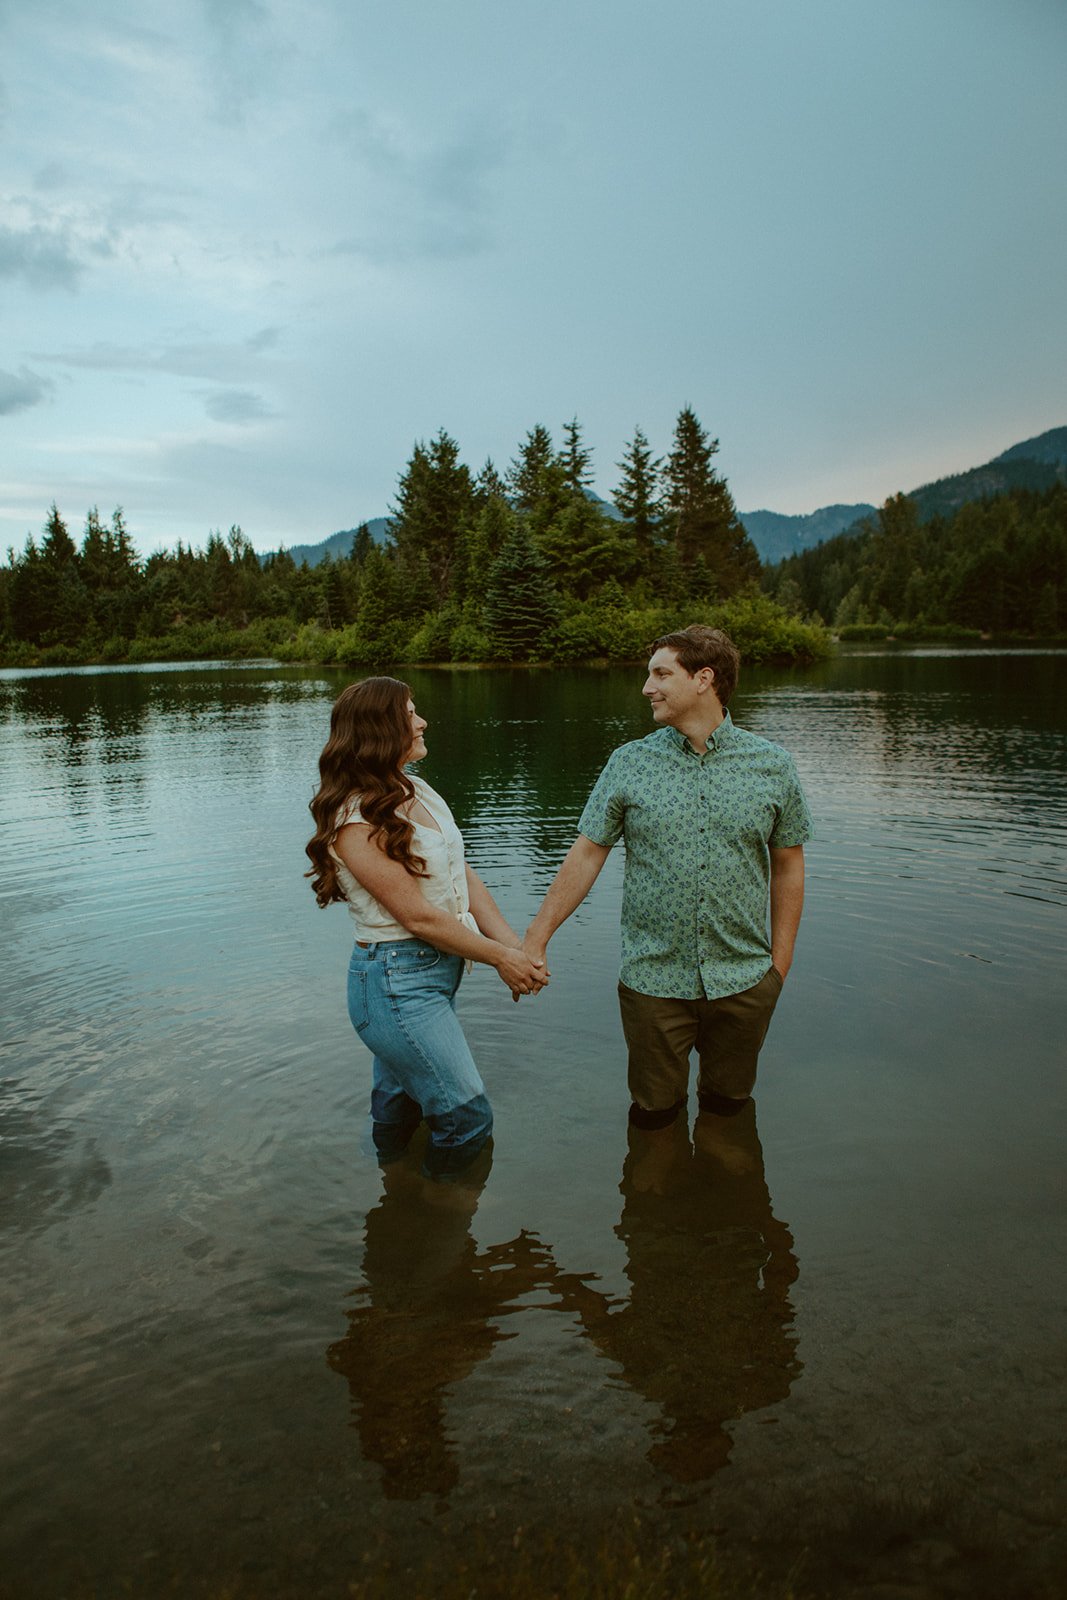 A Gold Creek Pond Outdoor Engagement Session - Shanean + Ian (75).jpg